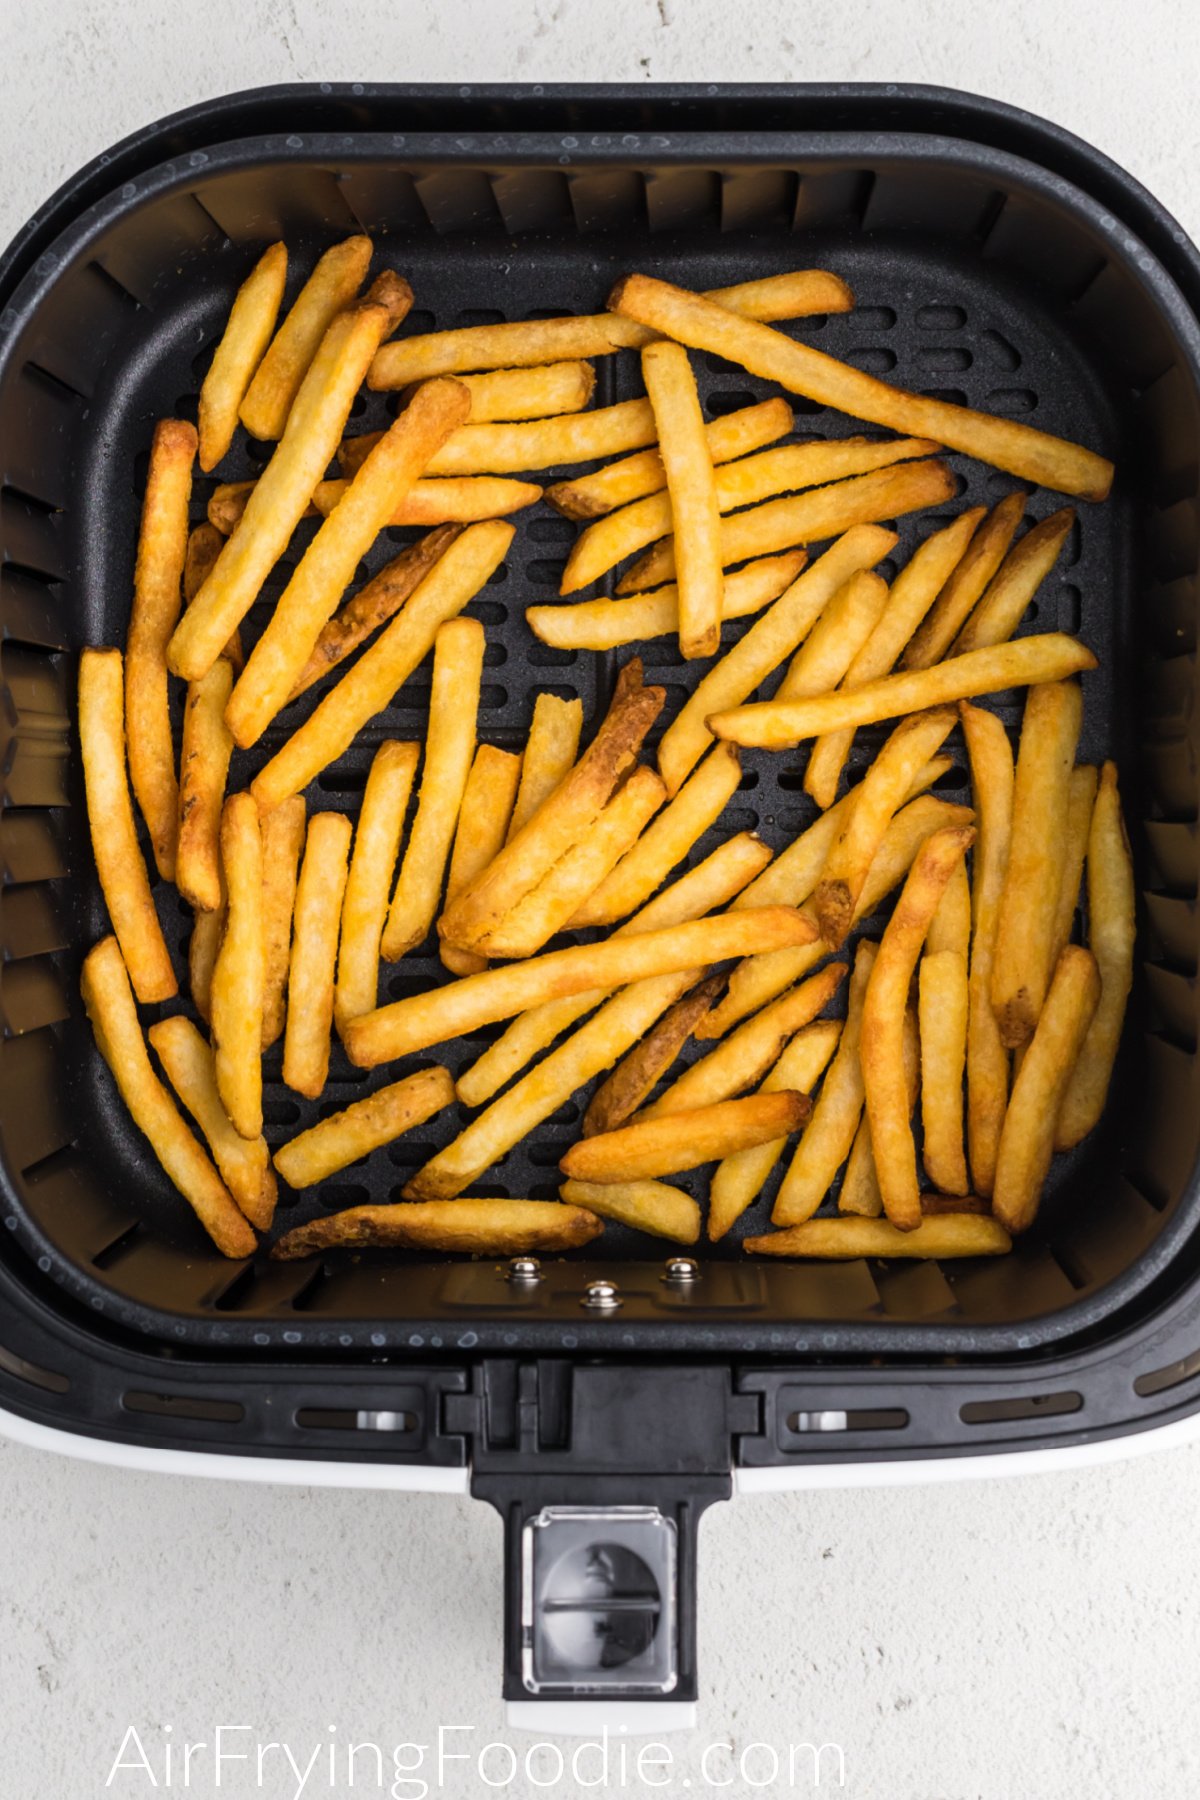 french fries fully cooked from frozen in the air fryer basket.